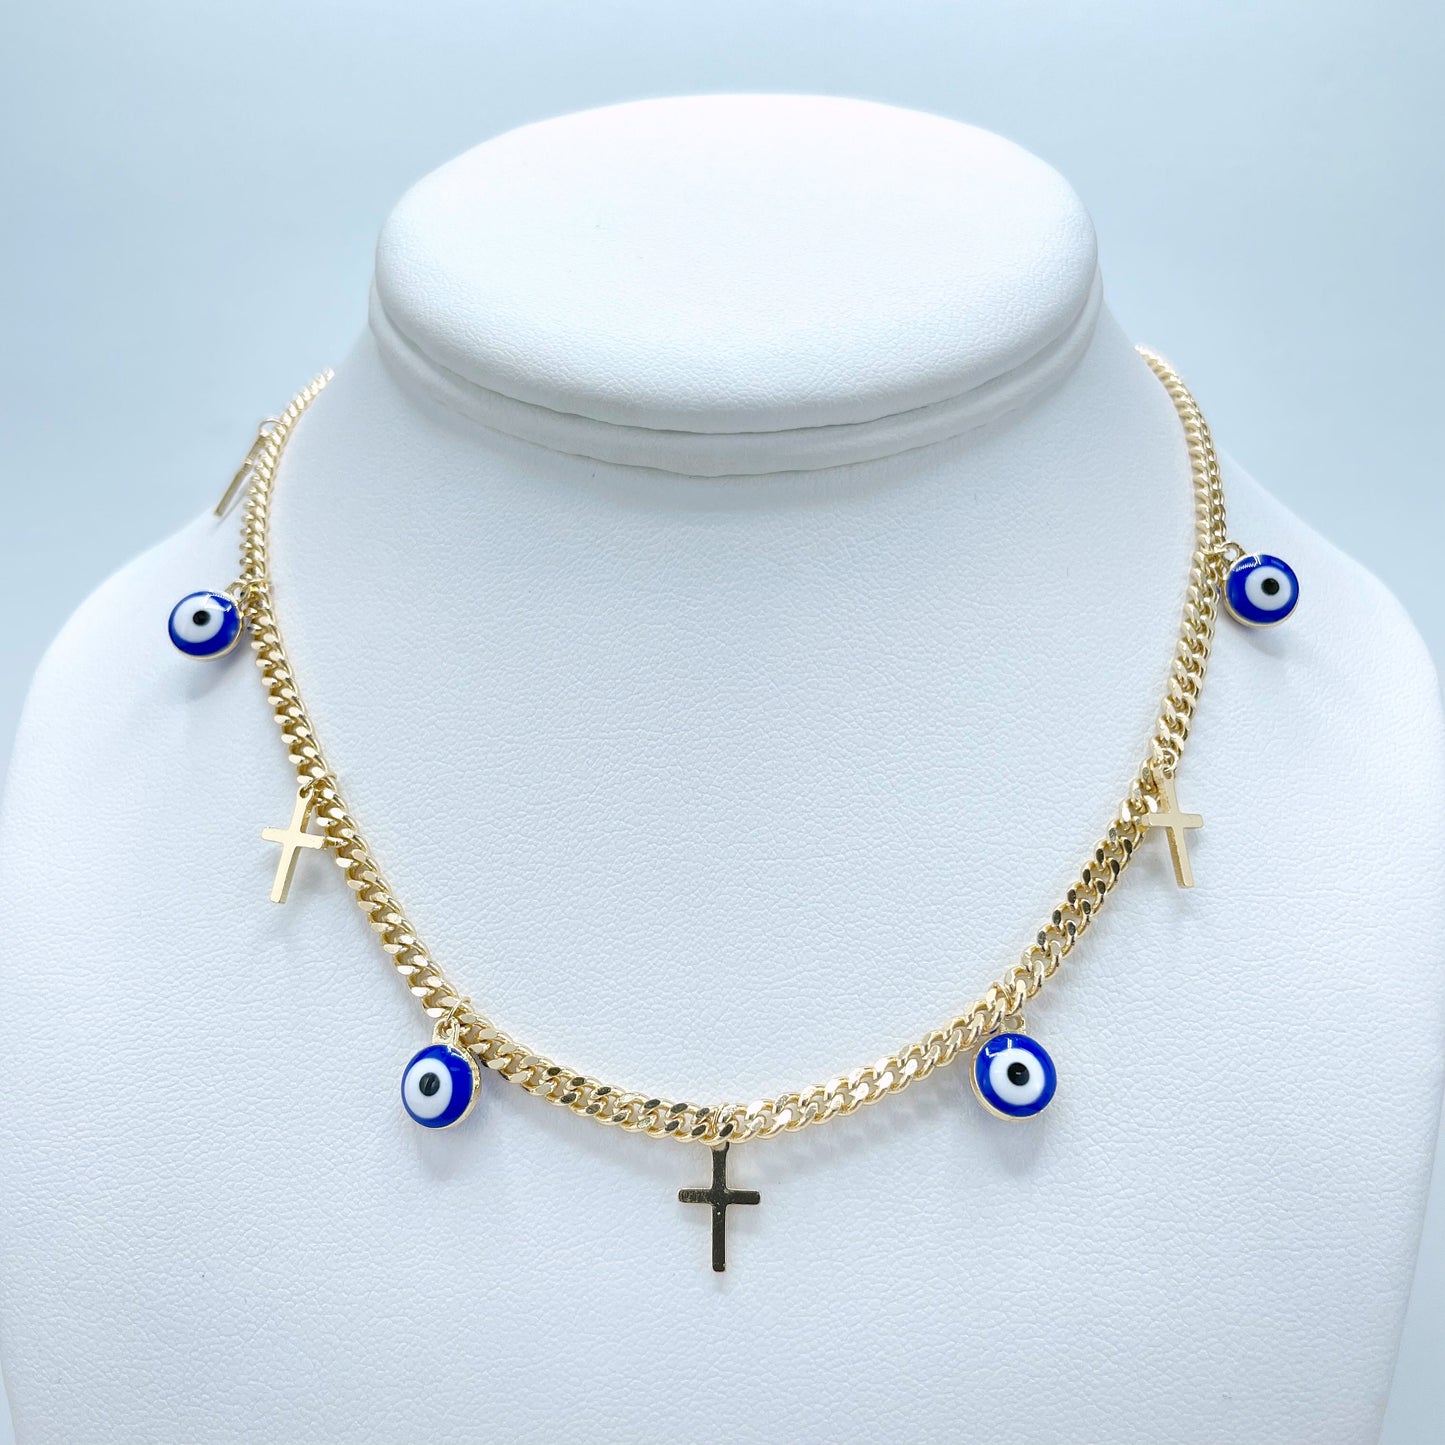 18k Gold Filled 4mm Curb Link Chain with Blue Evil Eyes & Cross Charms Necklace or Anklet Set, Wholesale Jewelry Making Supplies